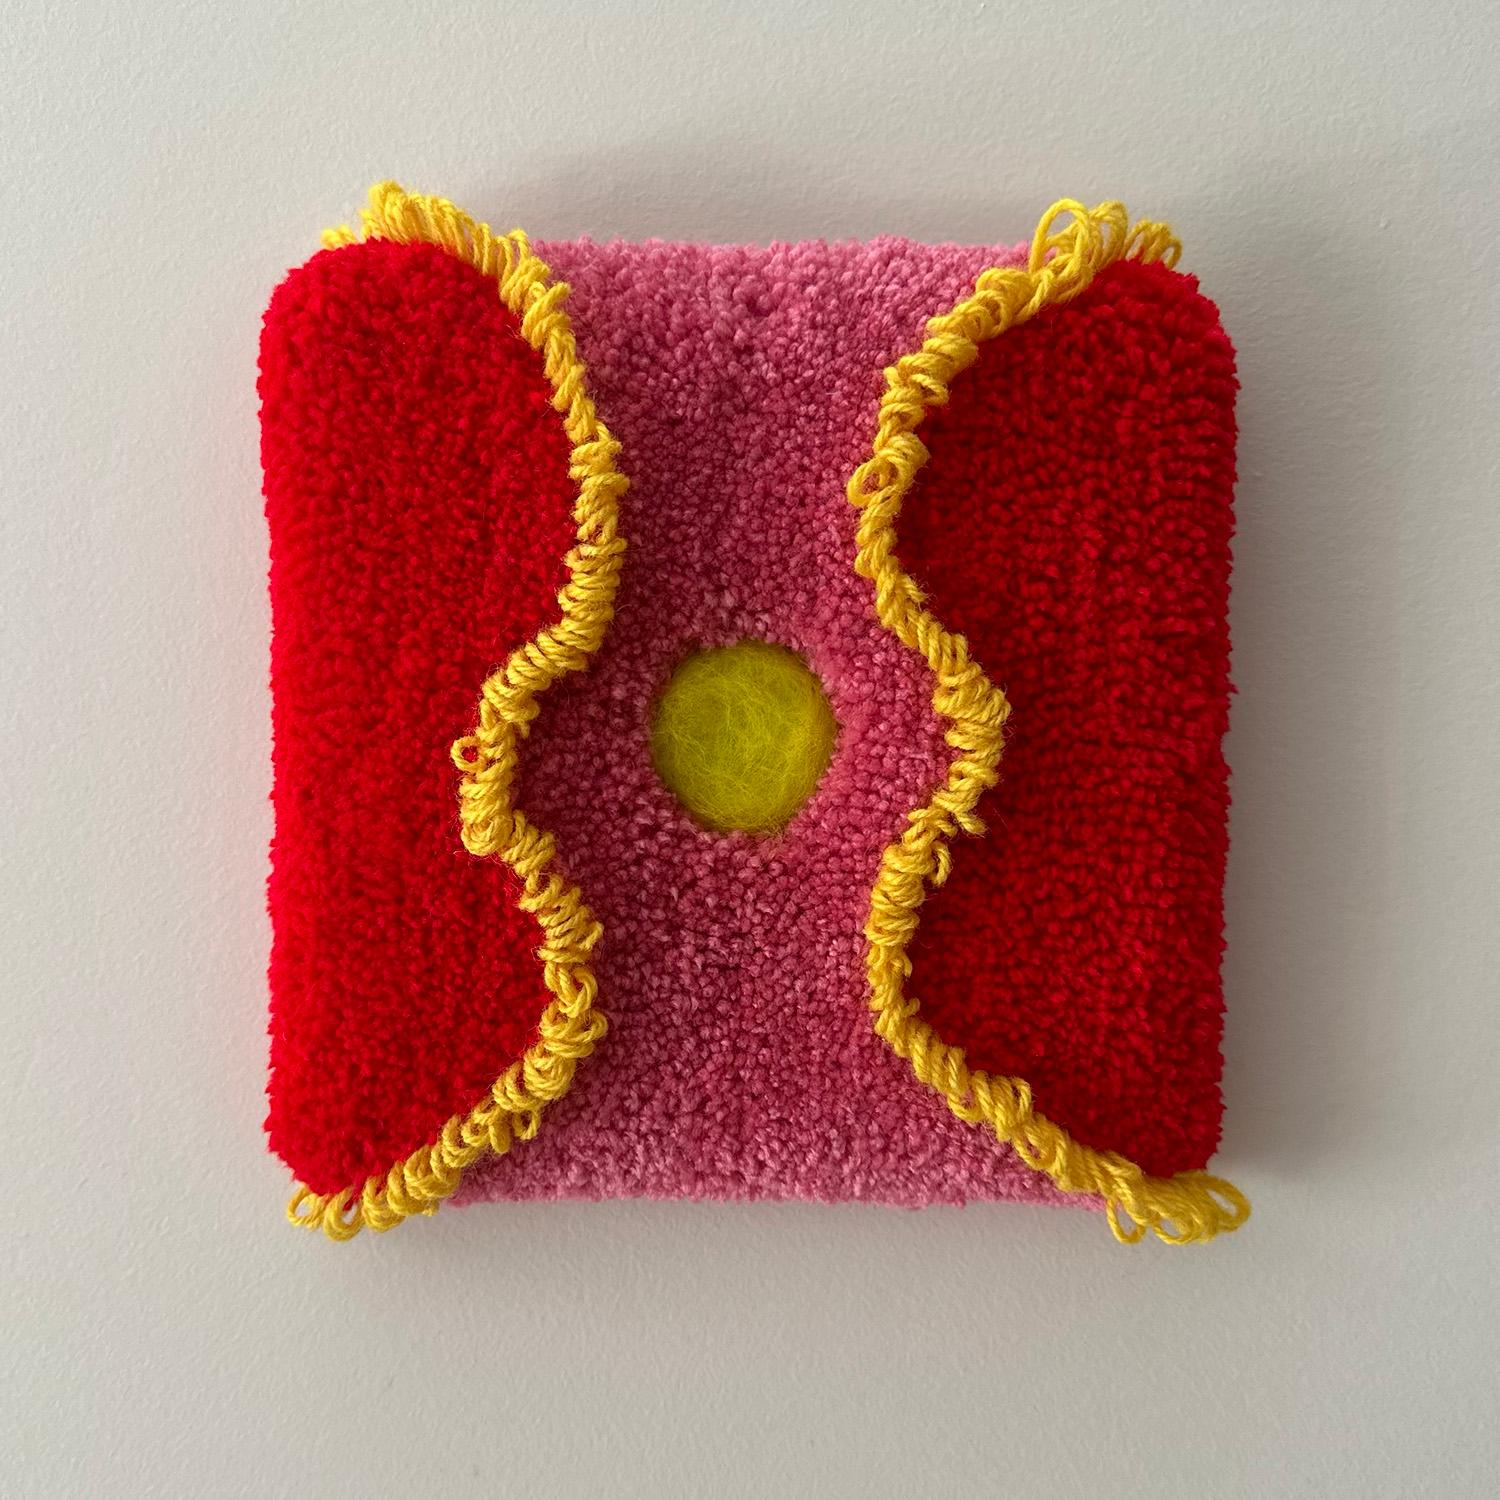 Nurture, texture, textile, pattern, pink, red, yellow, 3D - Sculpture by Ana Maria Farina